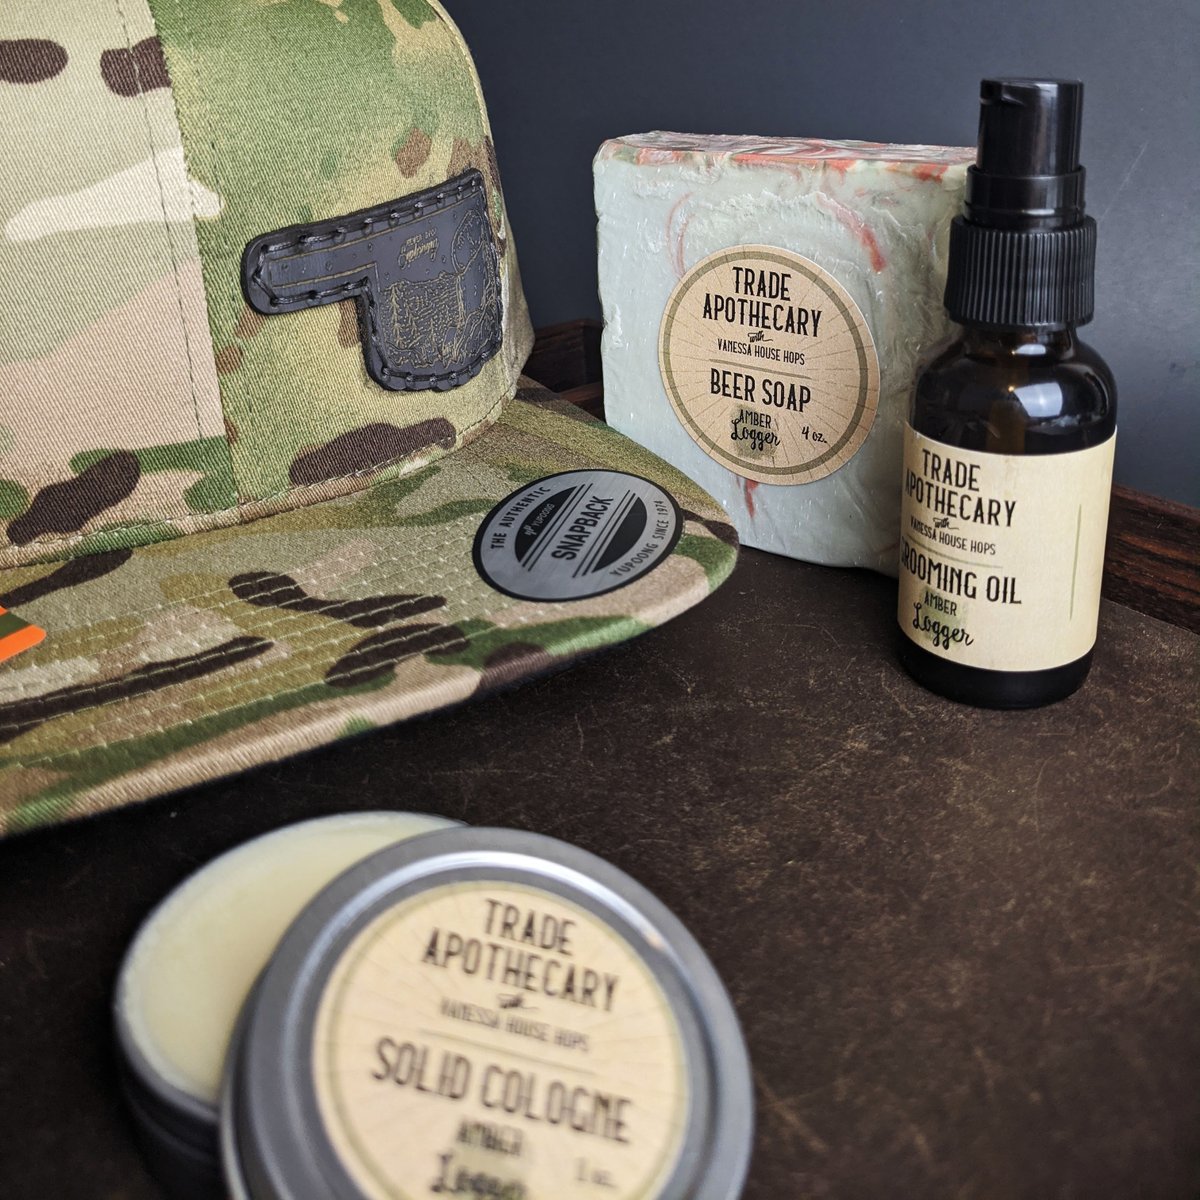 Missing your weekend already? Escape to the Great Outdoors with the rich aromas of oakmoss and amber in our Amber Logger Collection. #mondayblues #neverstopexploring #signaturescent #signaturestyle #stylenotfashion #mensgrooming #greatoutdoors #shoplocal #okc